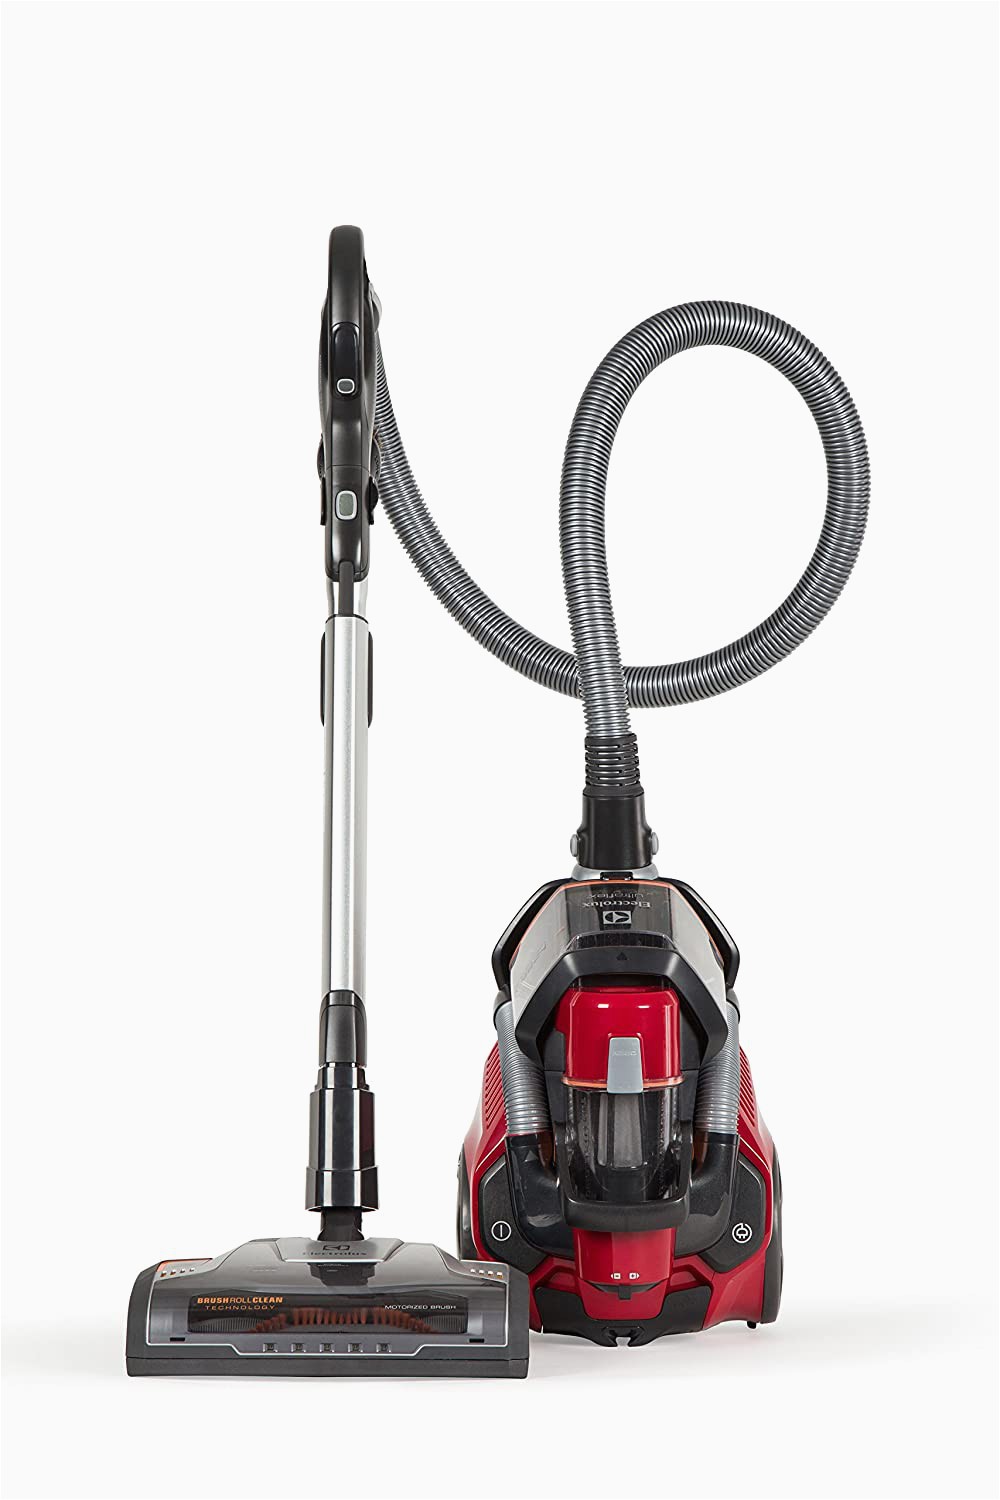 Best Vacuum for Hard Floors and area Rugs 10 Best Vacuum for Wool Carpet top Guide [updated]